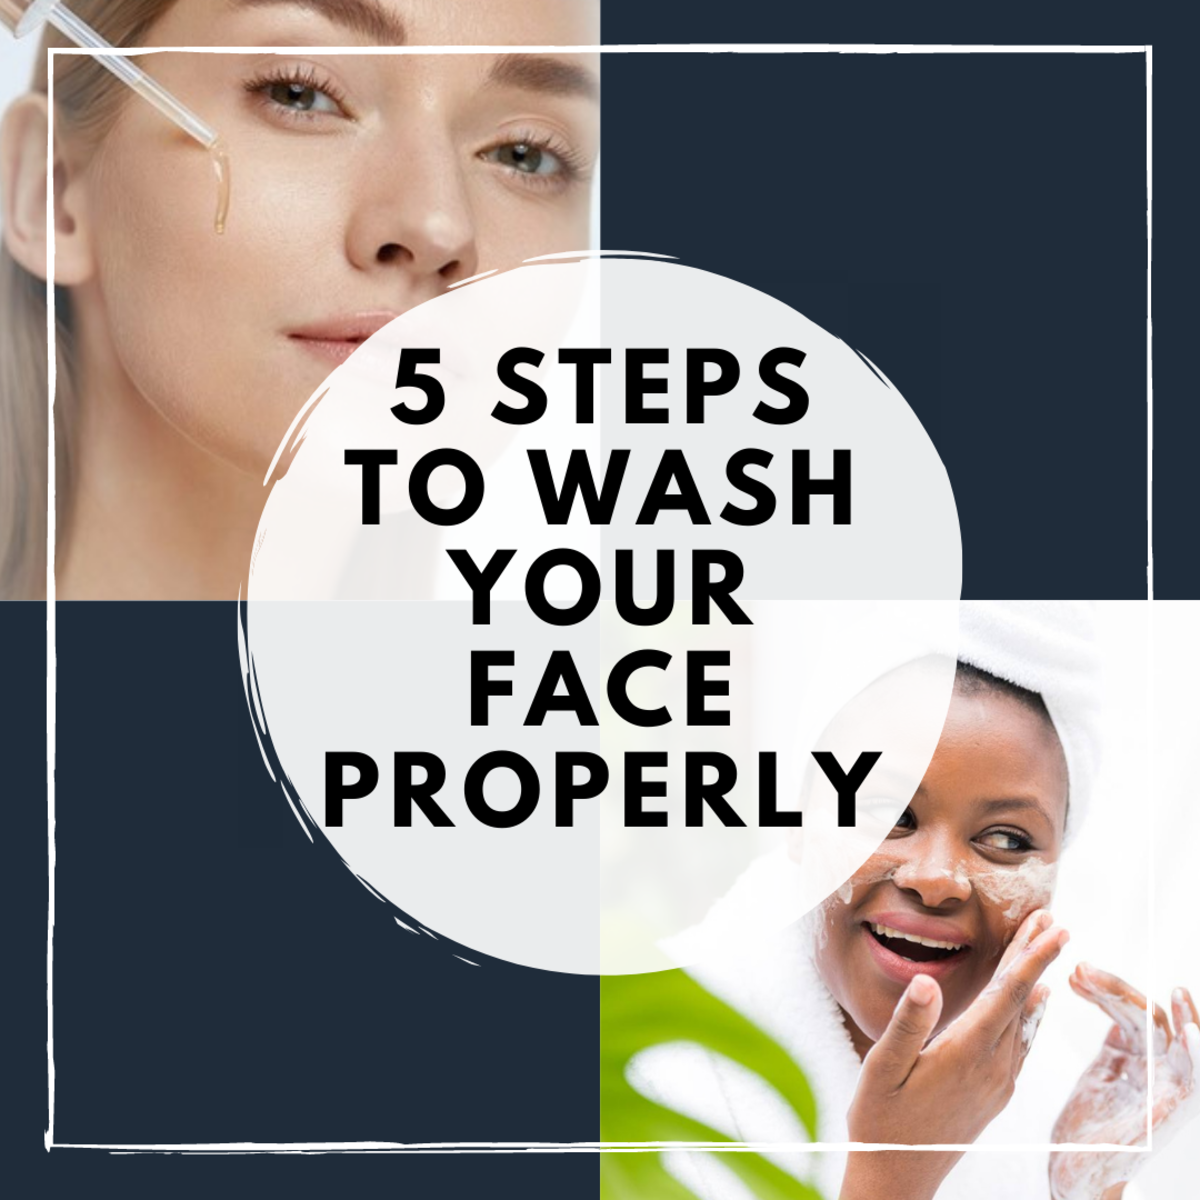 Learn how to wash your face the correct way with five simple steps.